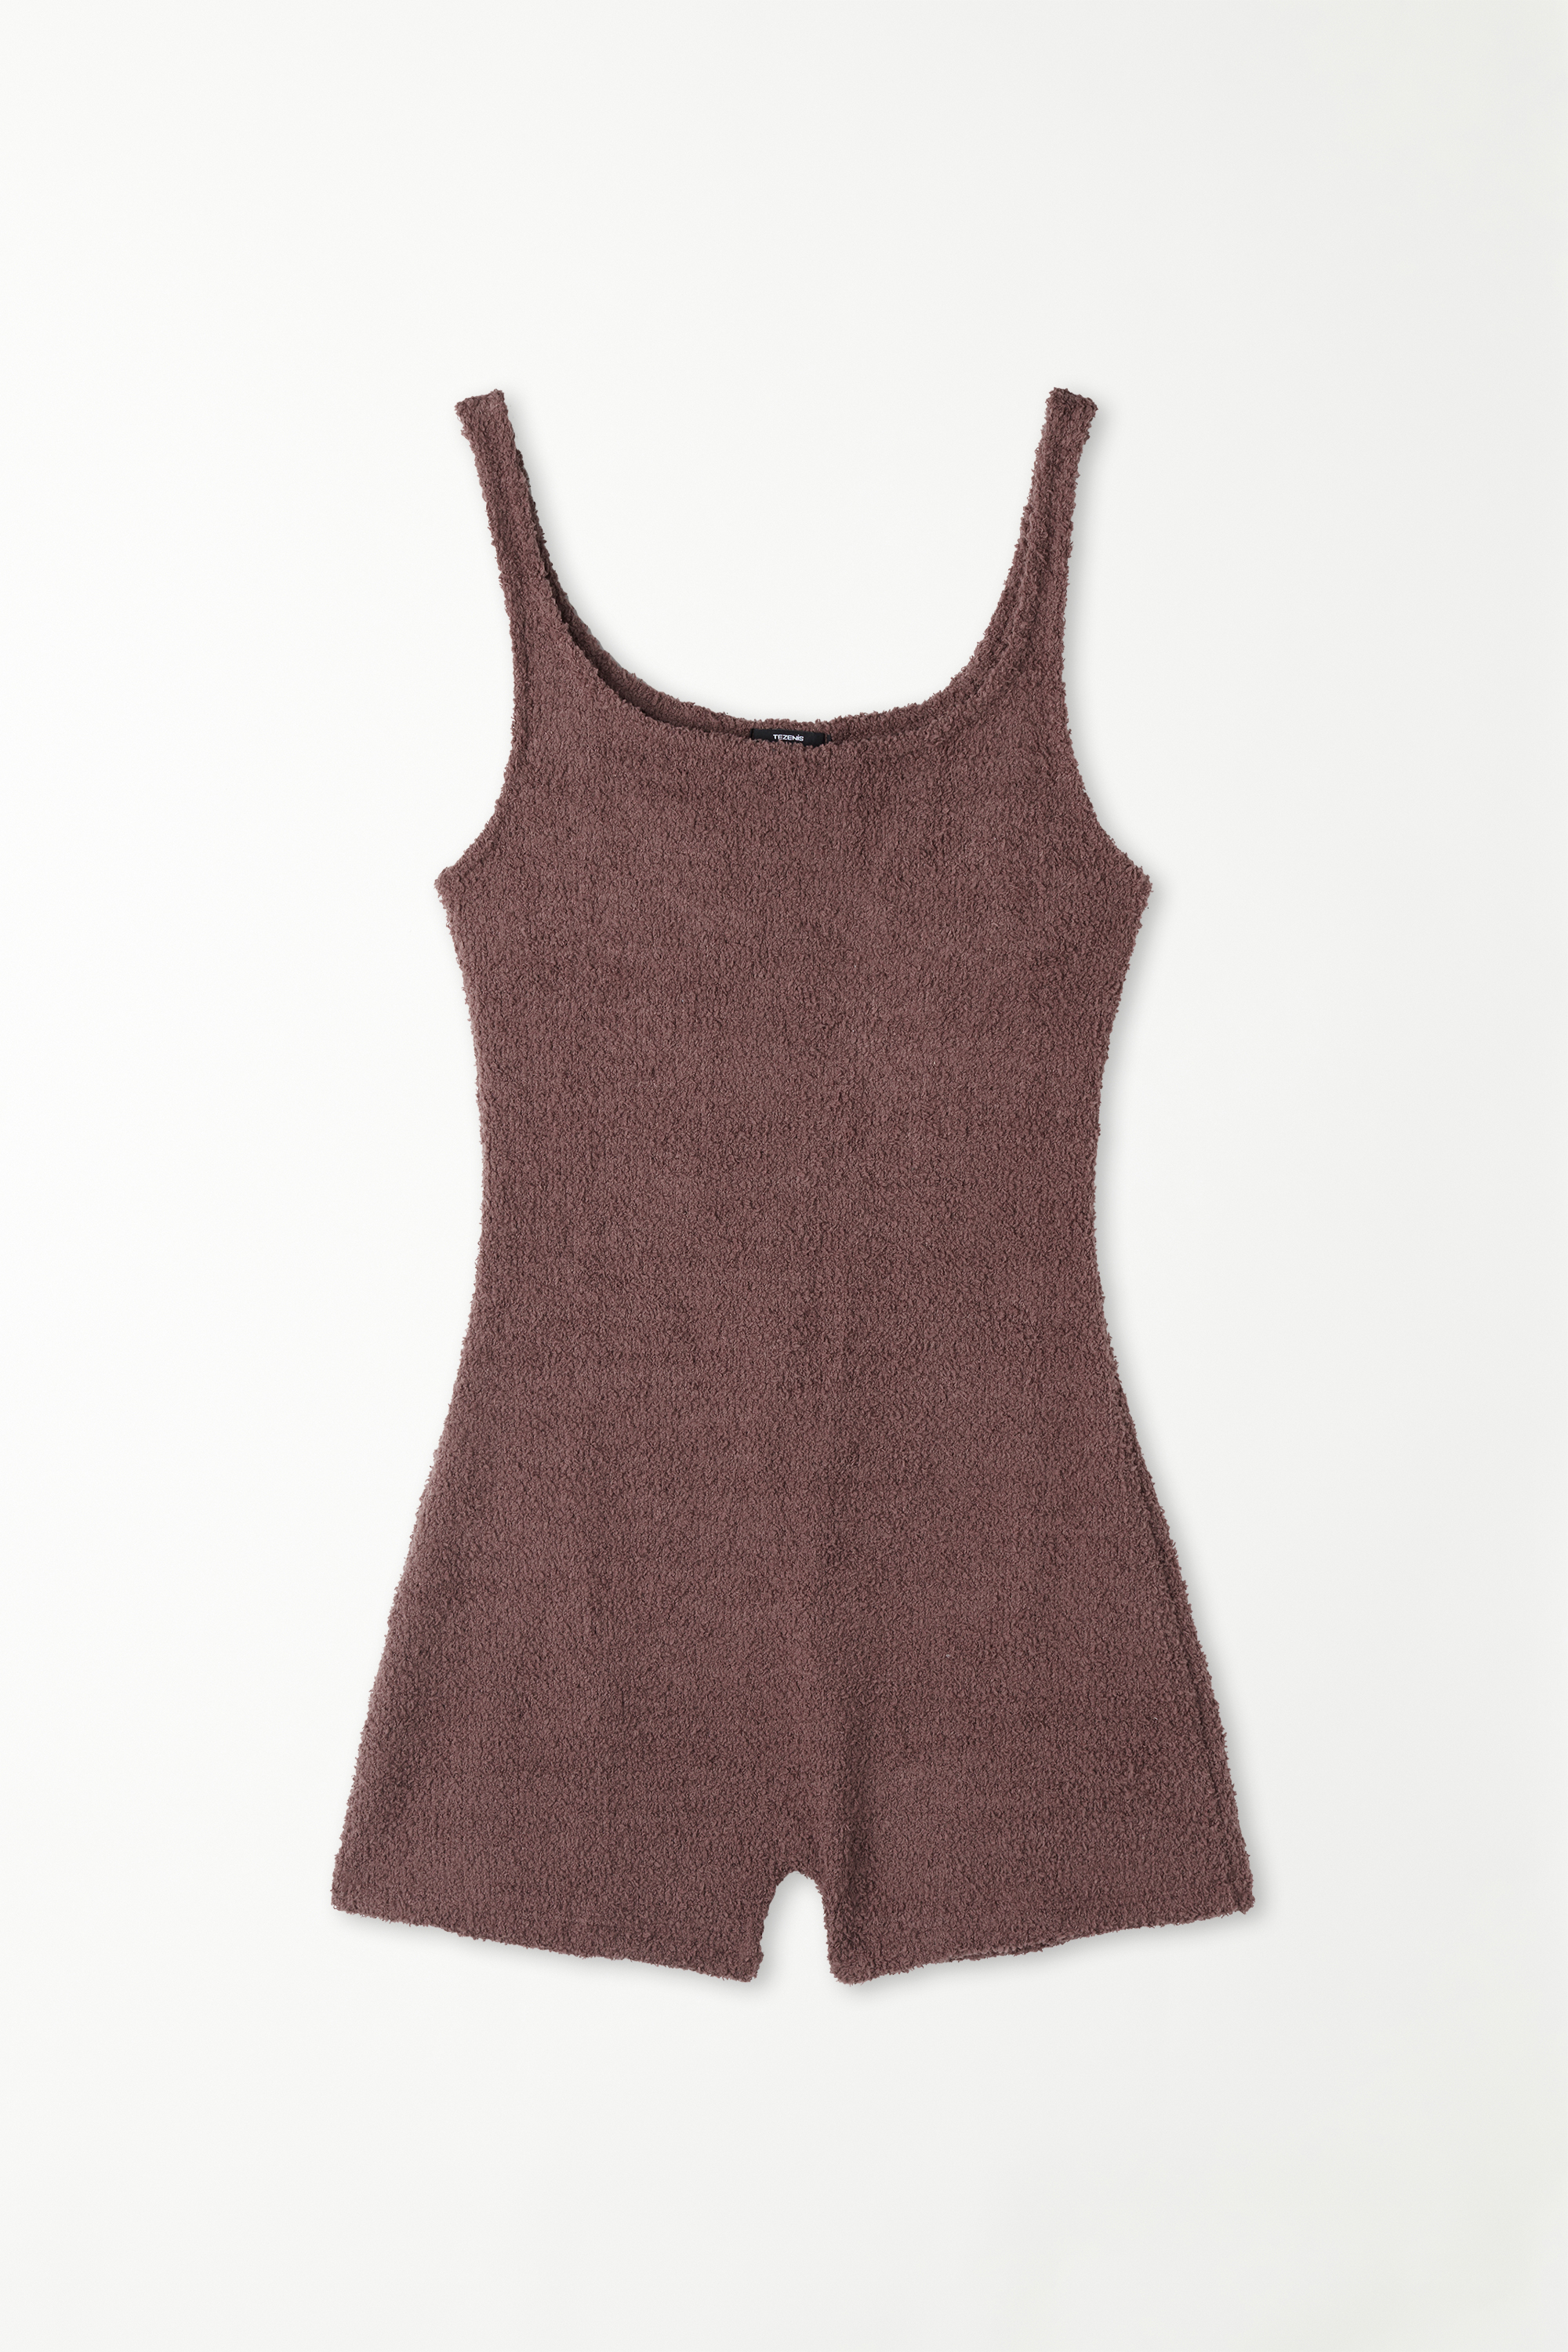 New Teddy Short Playsuit with Thin Shoulder Straps